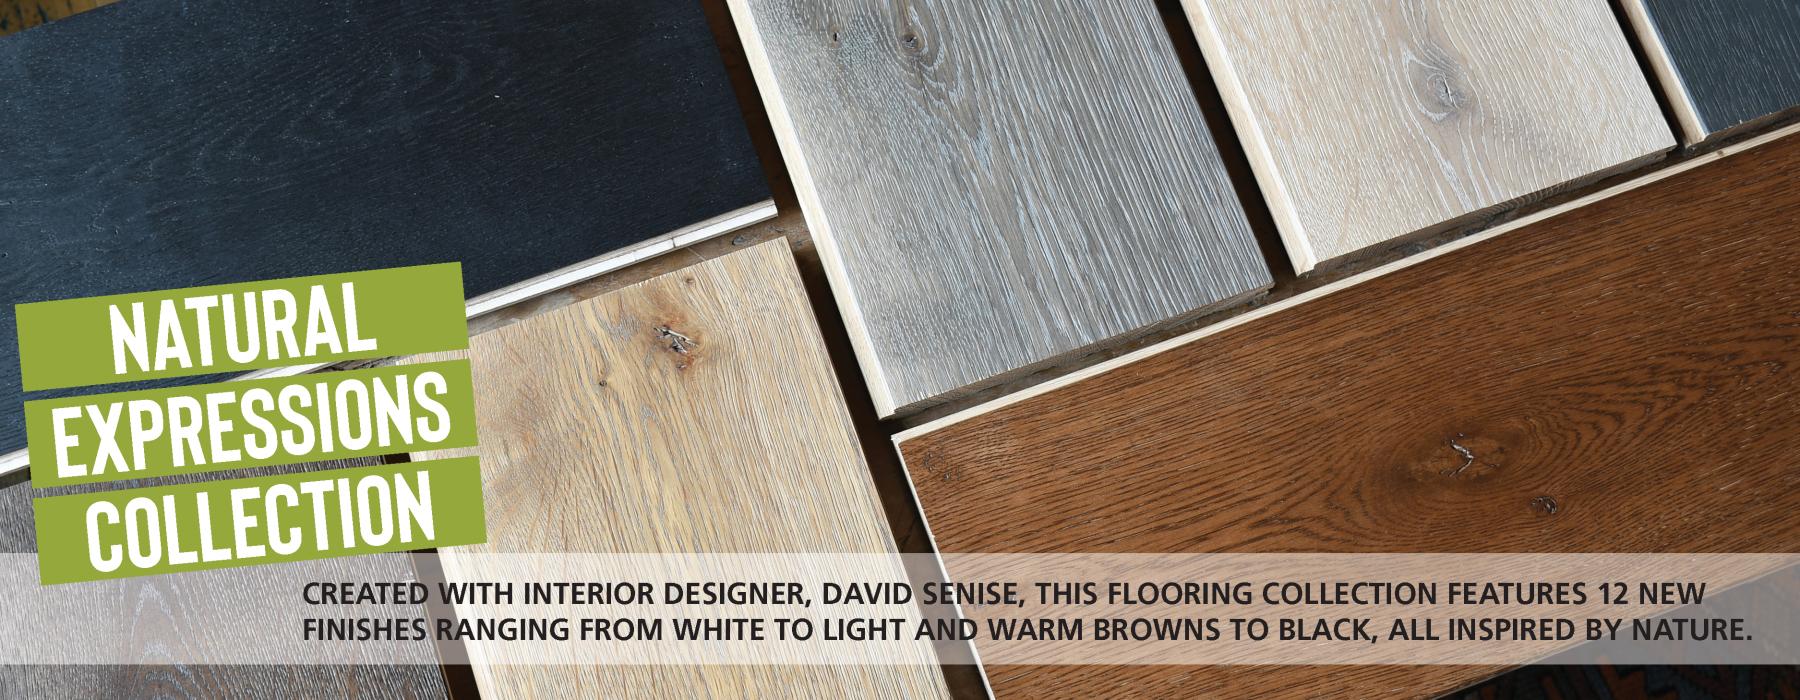 Pioneer Millworks Reclaimed & Sustainable Wood Products. Natural Expressions Collection: Flooring with Interior Designer David Senise